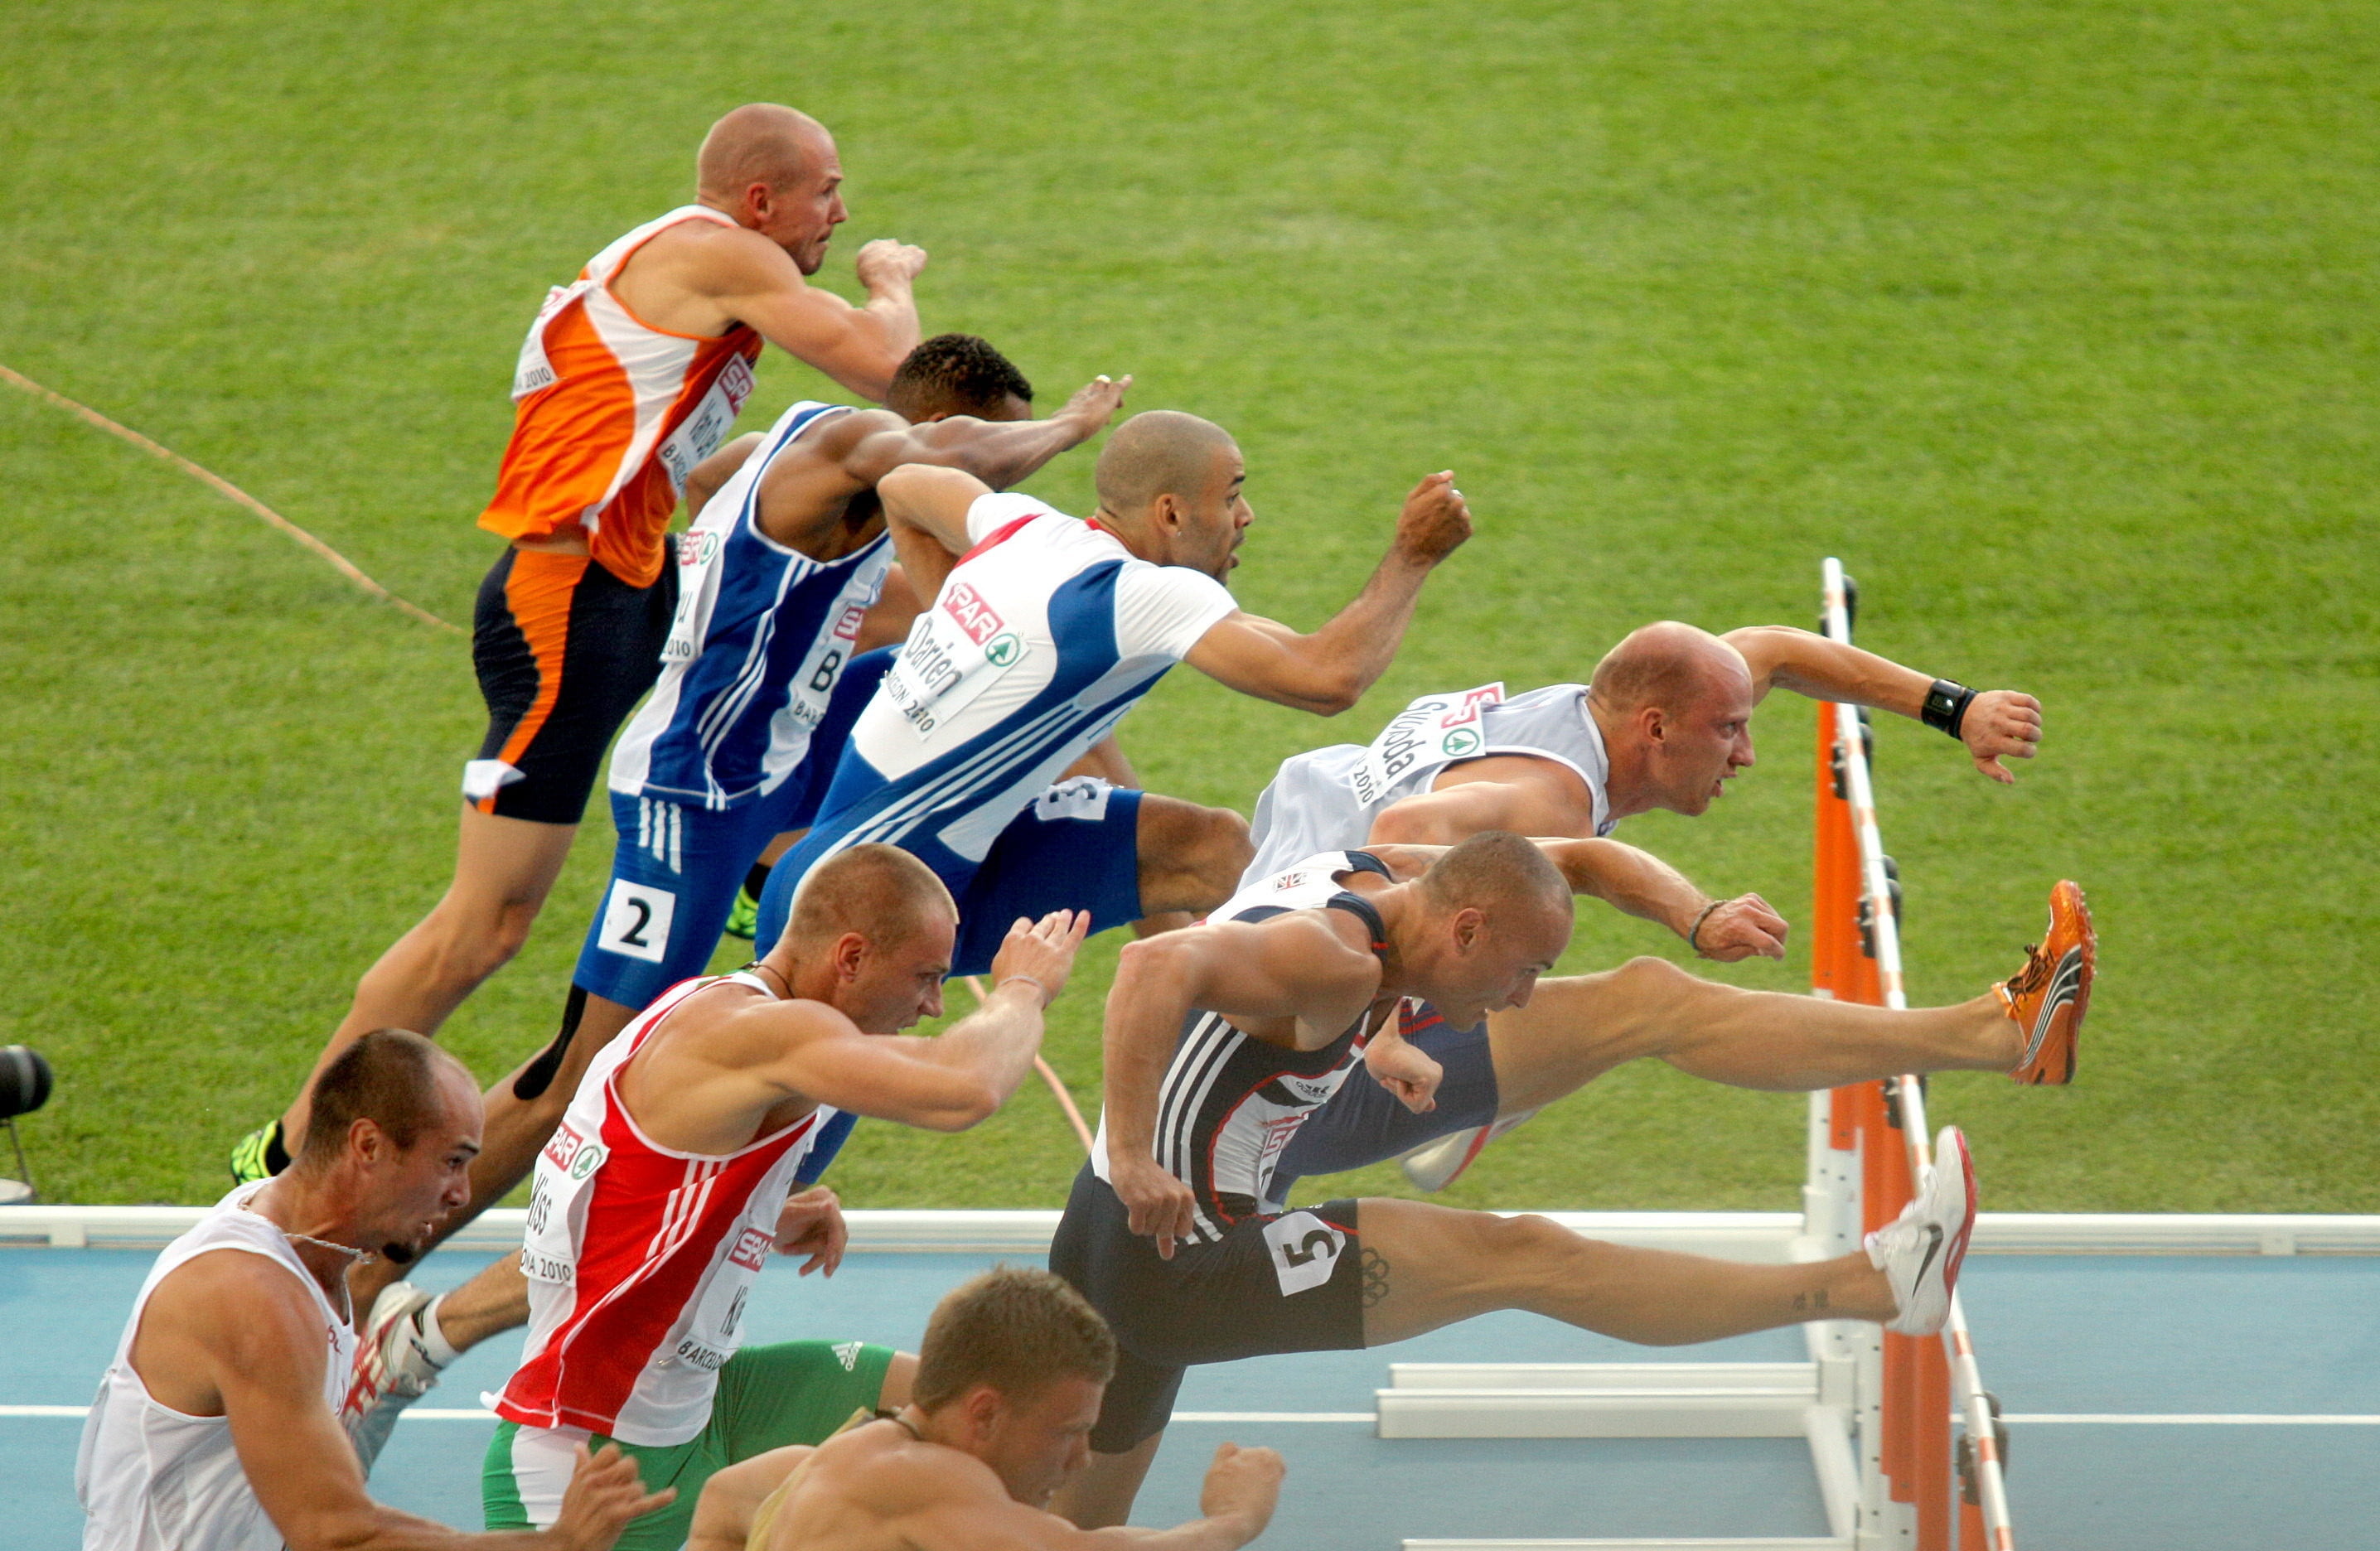 Hurdling: 110 m hurdles, A footrace with a series of hurdles, Short distance running. 2880x1880 HD Background.